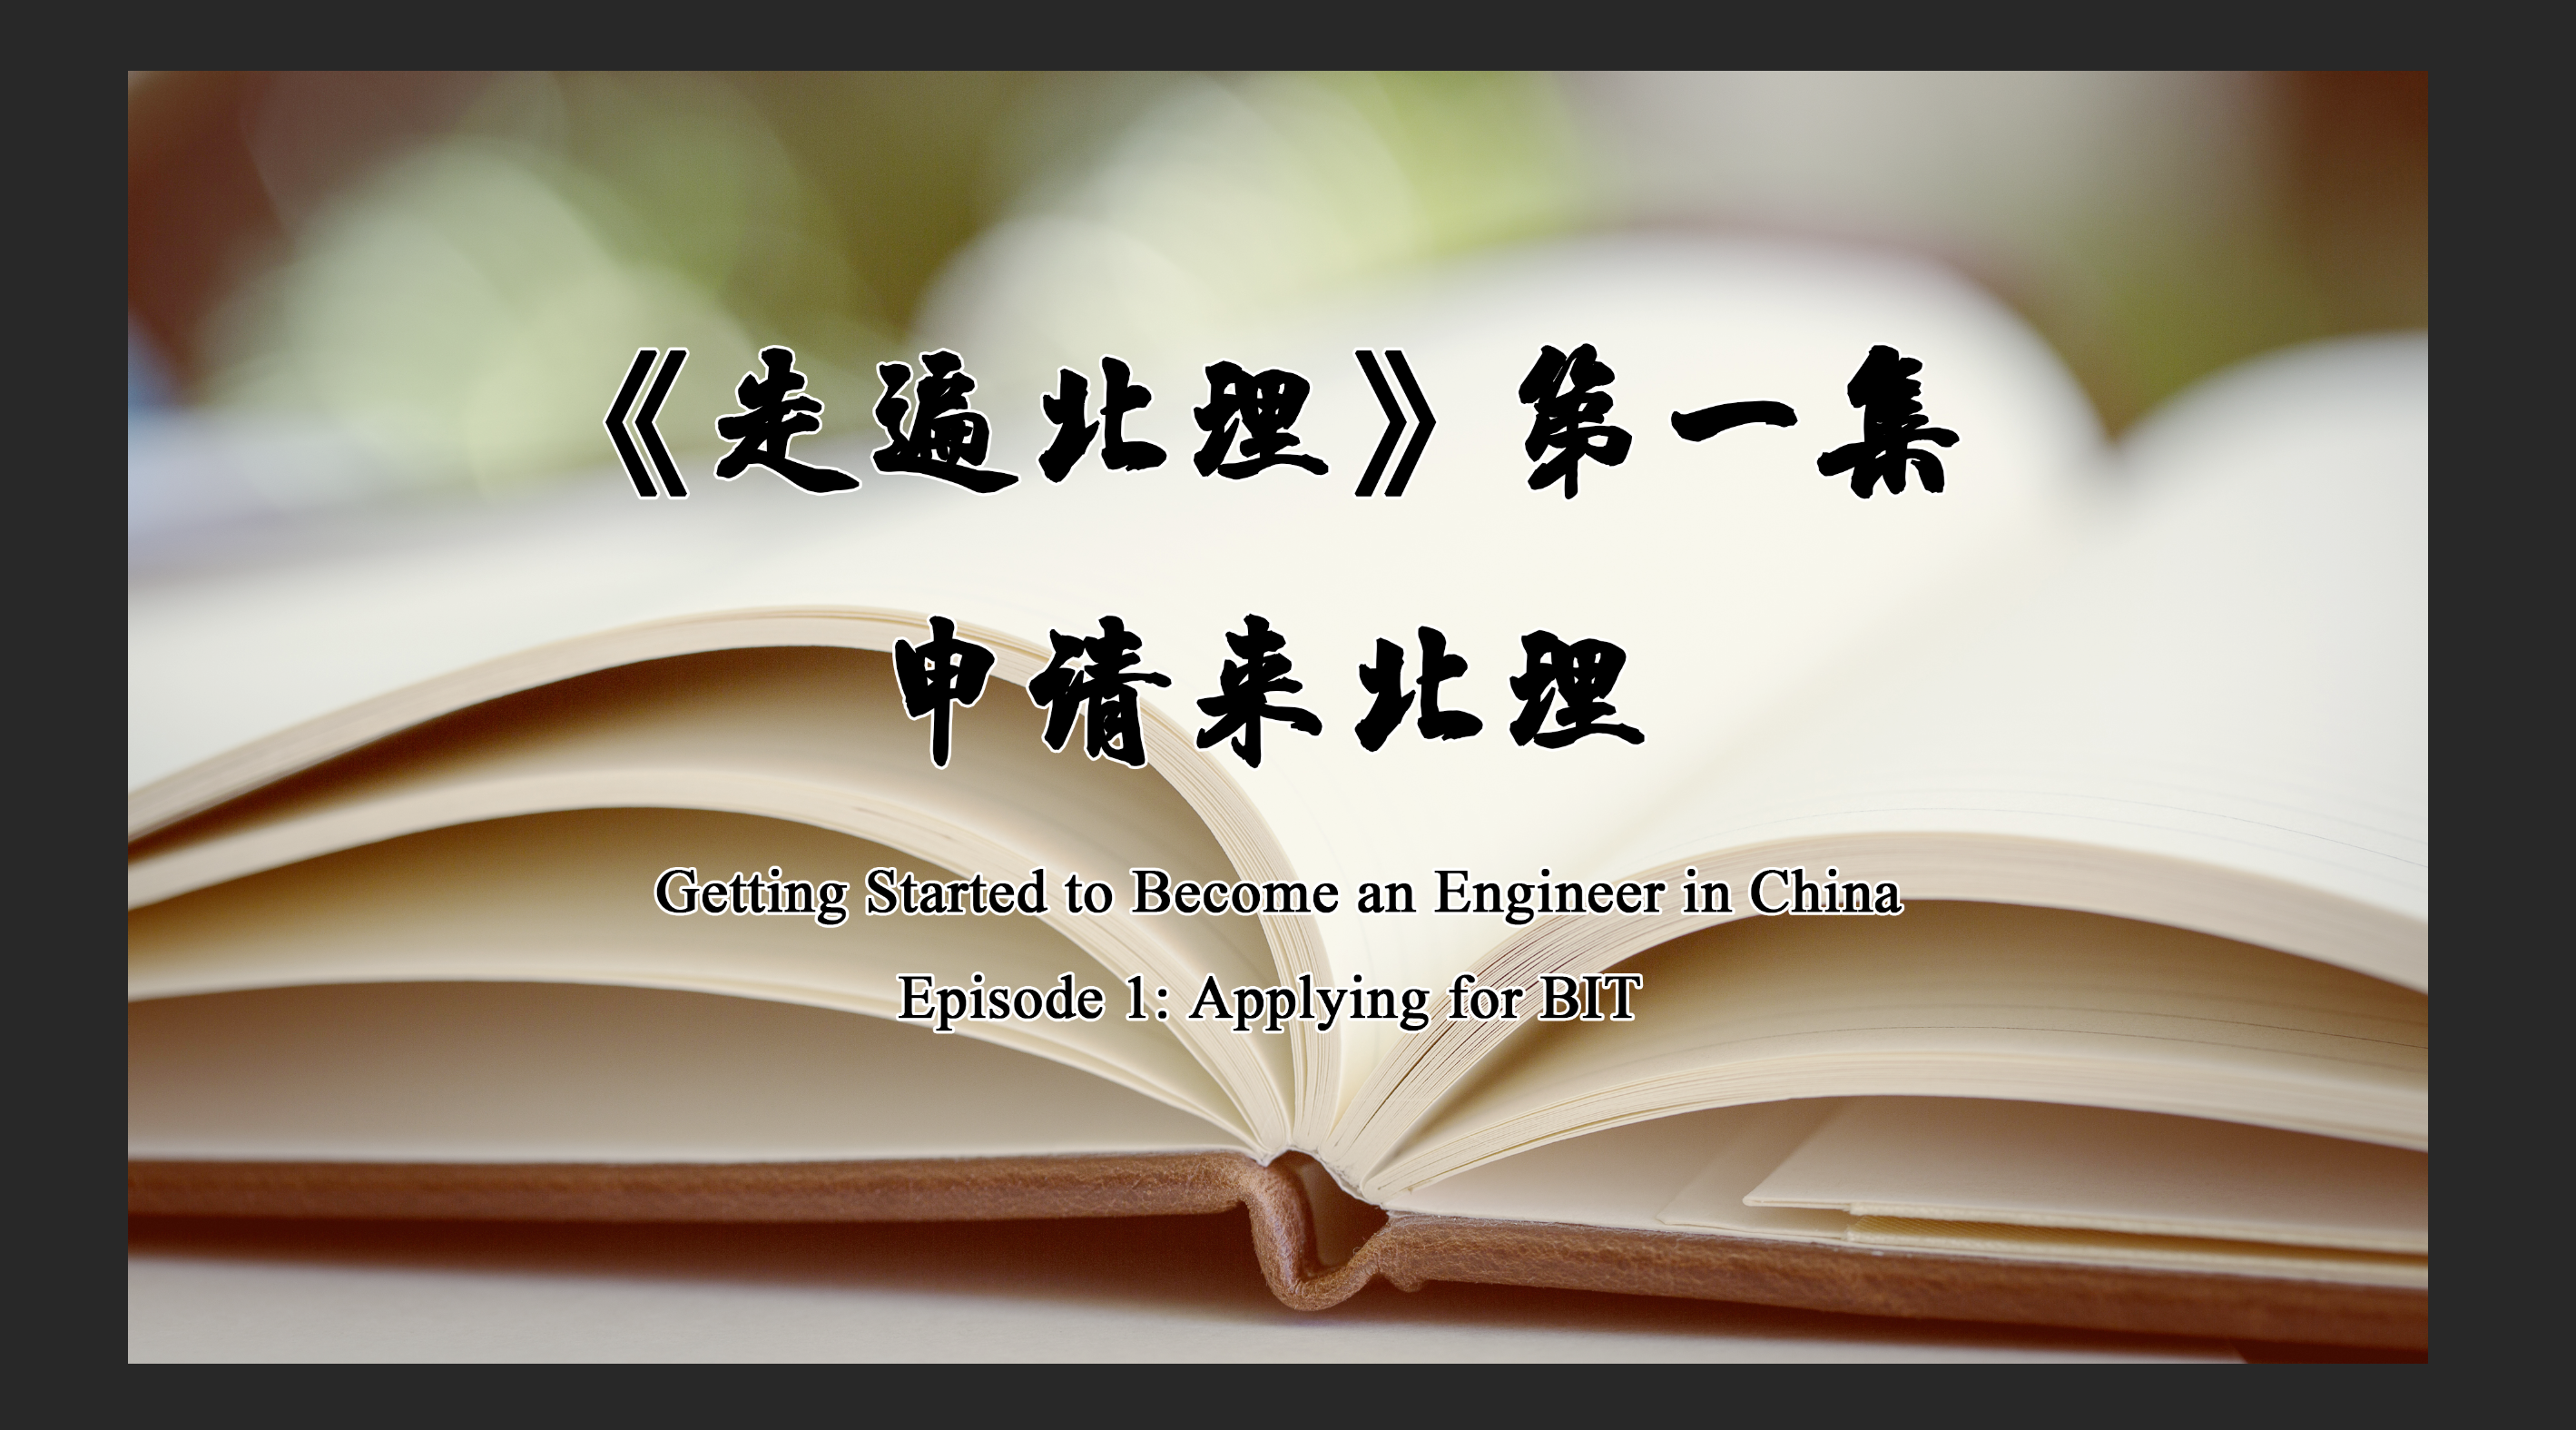 Getting started to become an engineer in China-Episode 1: General Information and how to apply for scholarship